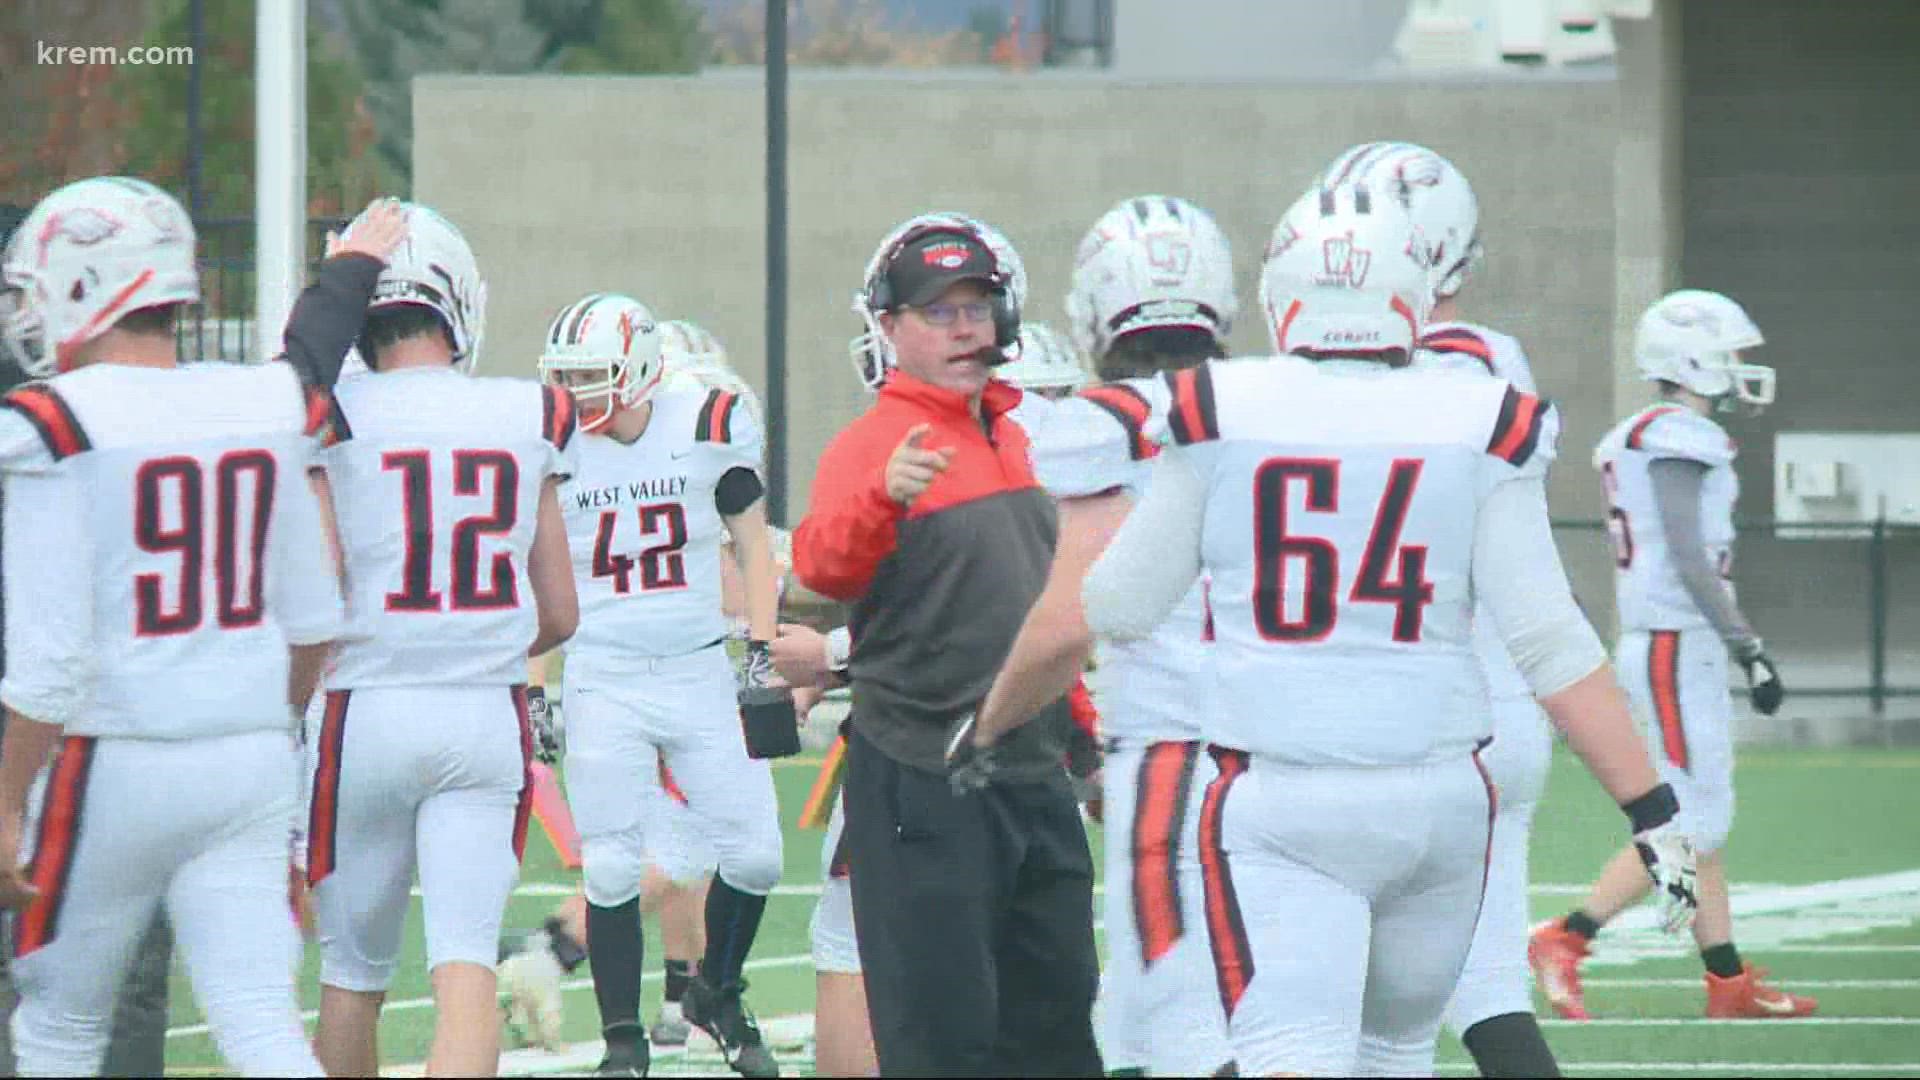 KREM 2 mic'd up West Valley's coach Whitney for their game against Rogers High School.